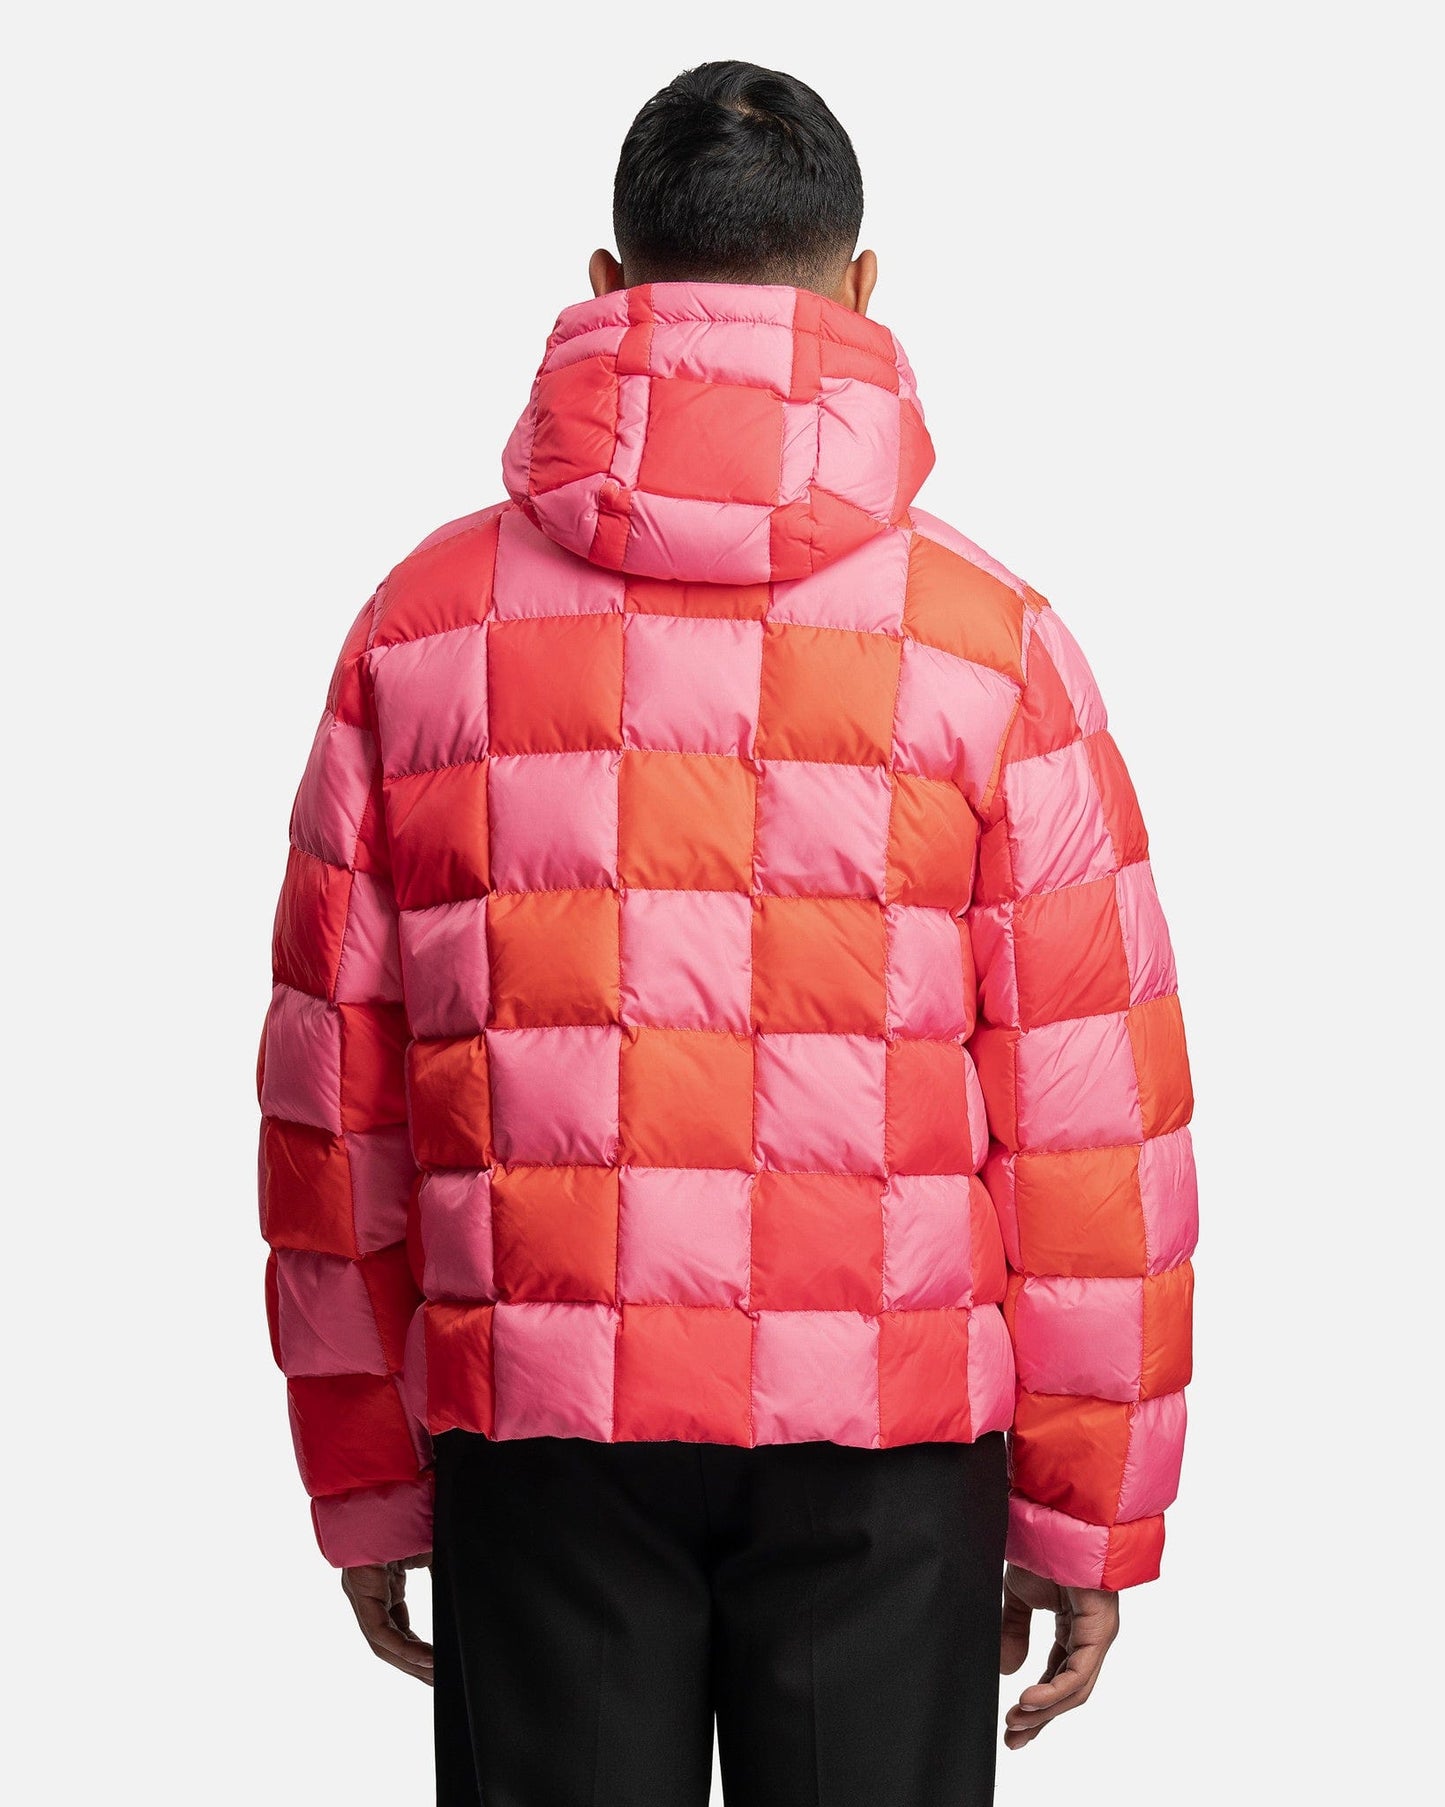 ERL Men's Jackets Gradient Checker Hooded Puffer Coat in Pink